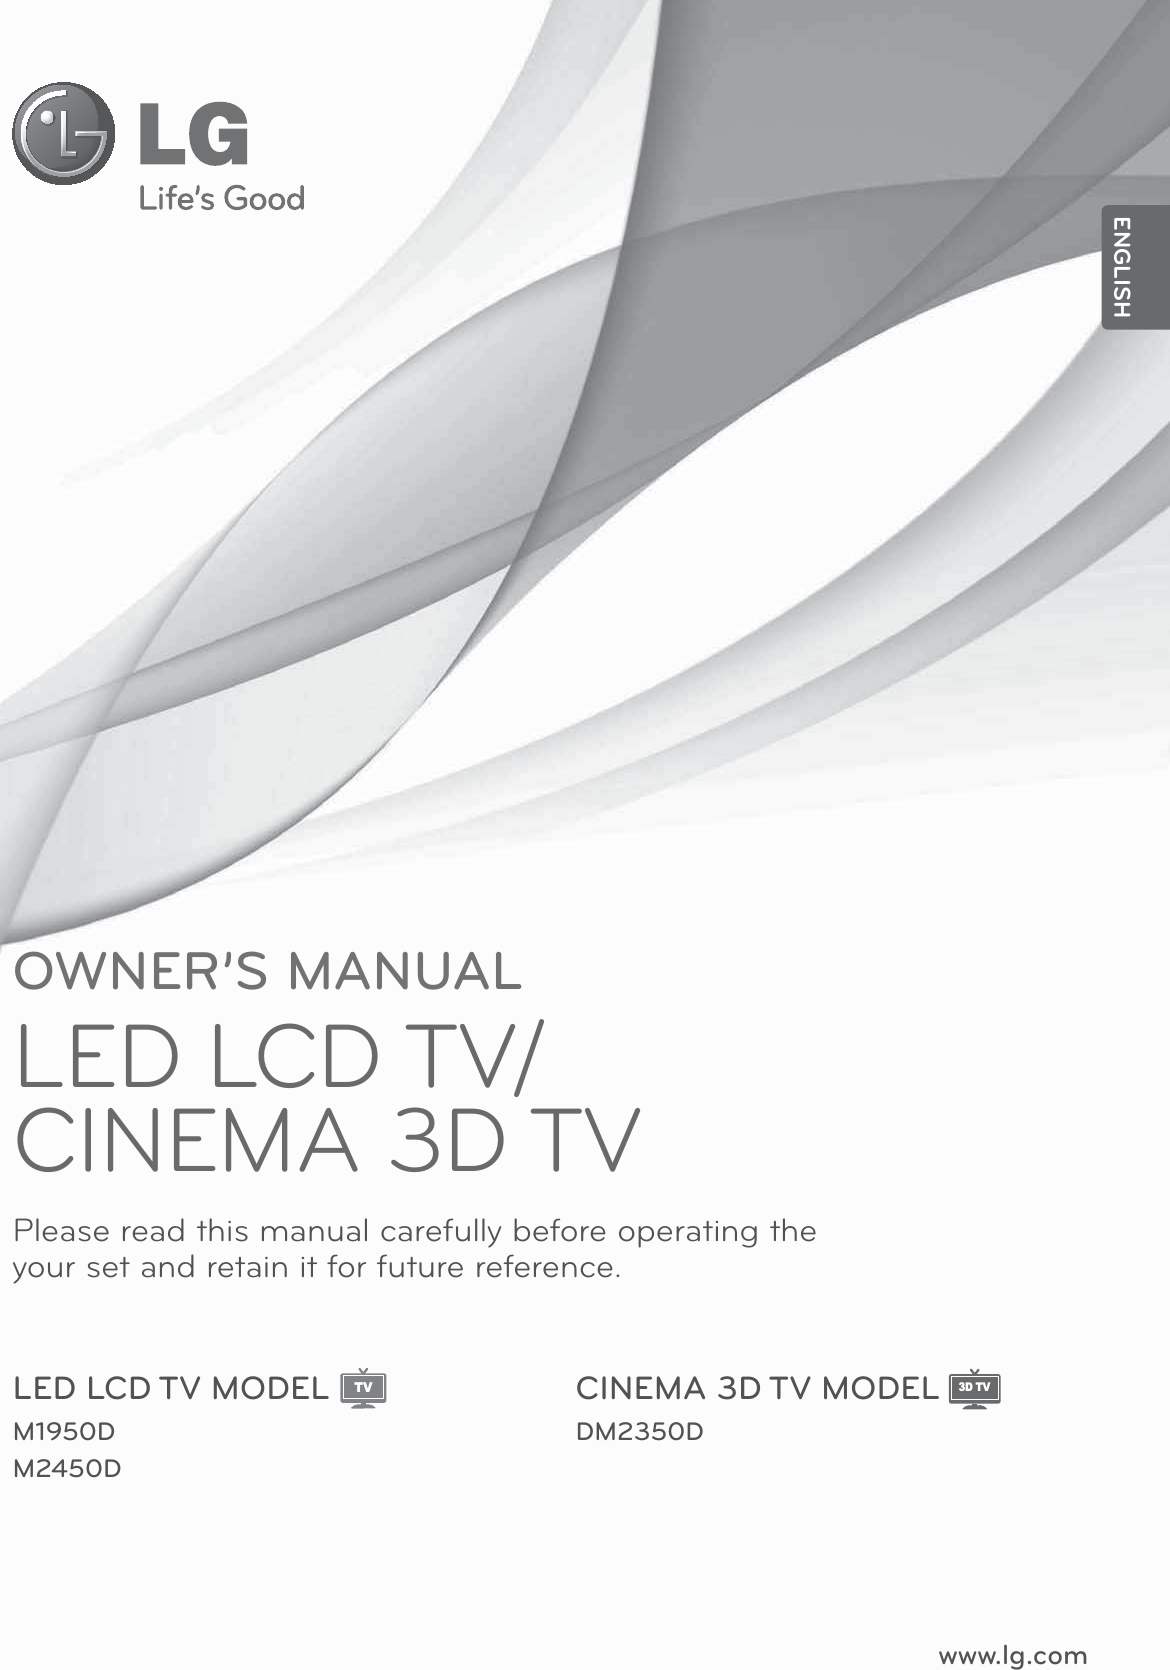 www.lg.comOWNER’S MANUALLED LCD TV/CINEMA 3D TVDM2350DM1950DM2450DPlease read this manual carefully before operating the your set and retain it for future reference.LED LCD TV MODEL CINEMA 3D TV MODELENGLISHTV3D TV